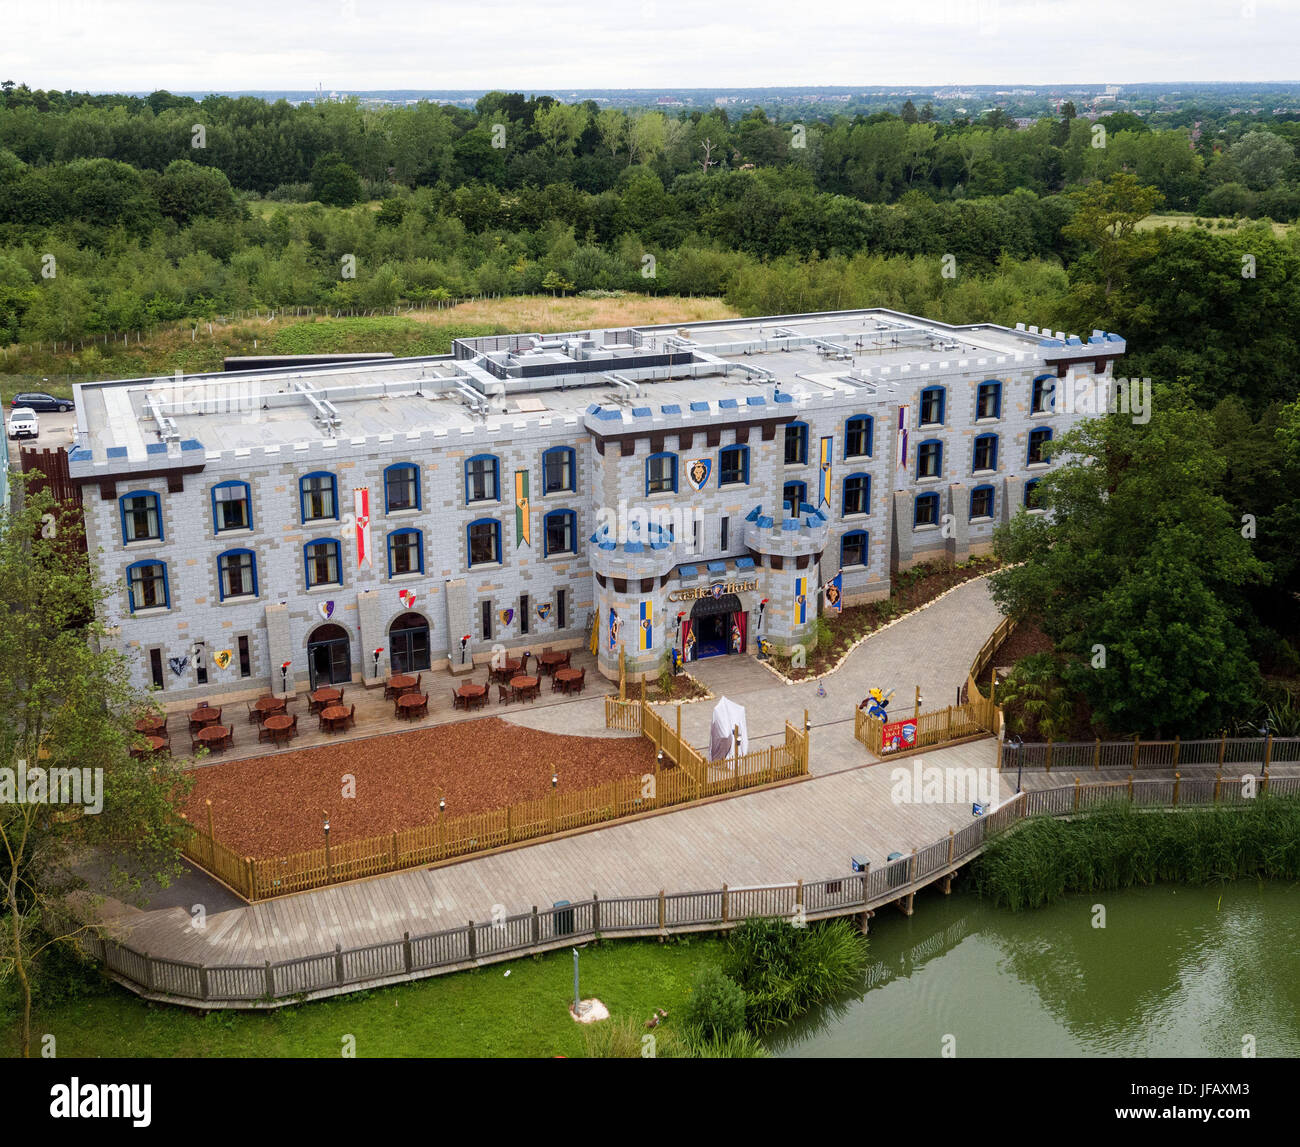 An aerial image of the new LEGOLAND Castle Hotel, which opens to the public at LEGOLAND Windsor Resort in Berkshire on July 1. Stock Photo